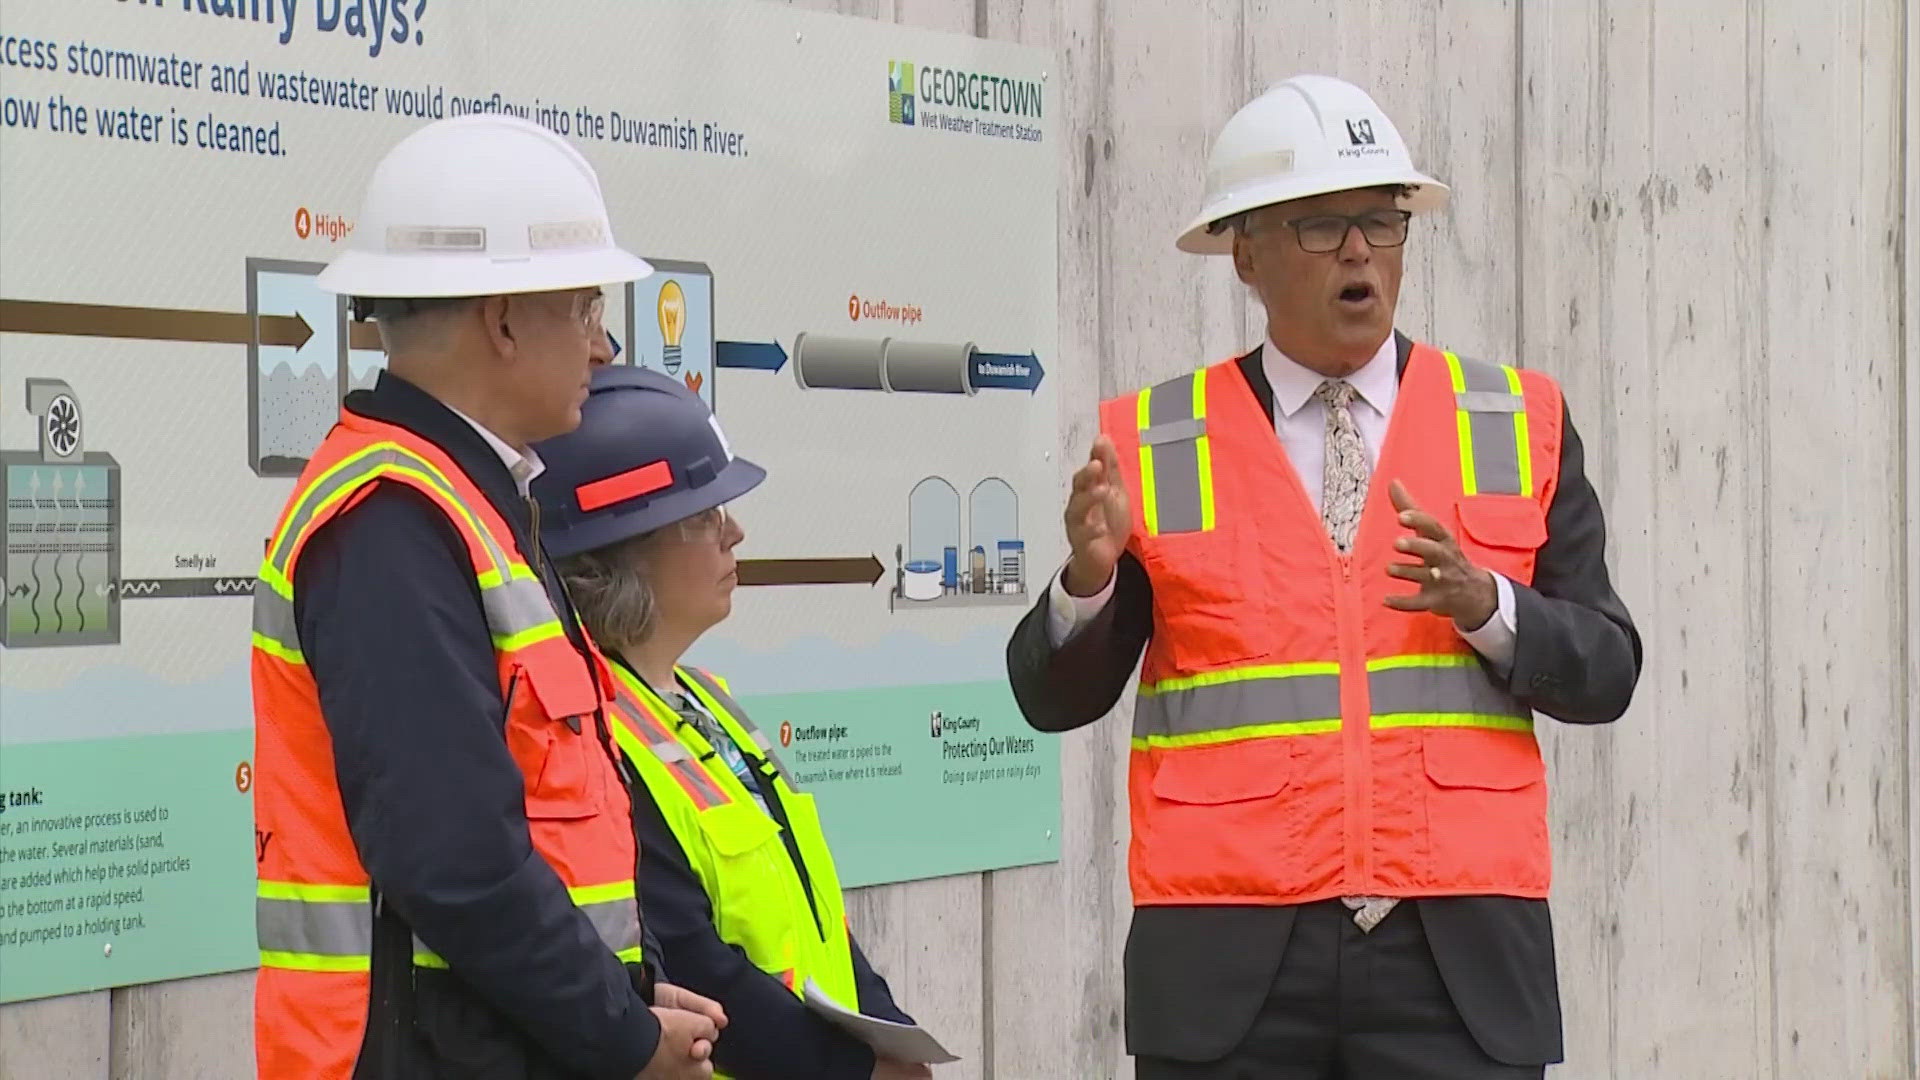 Gov. Jay Inslee joined King County officials Tuesday to tour the Georgetown Wet Weather Treatment Station.